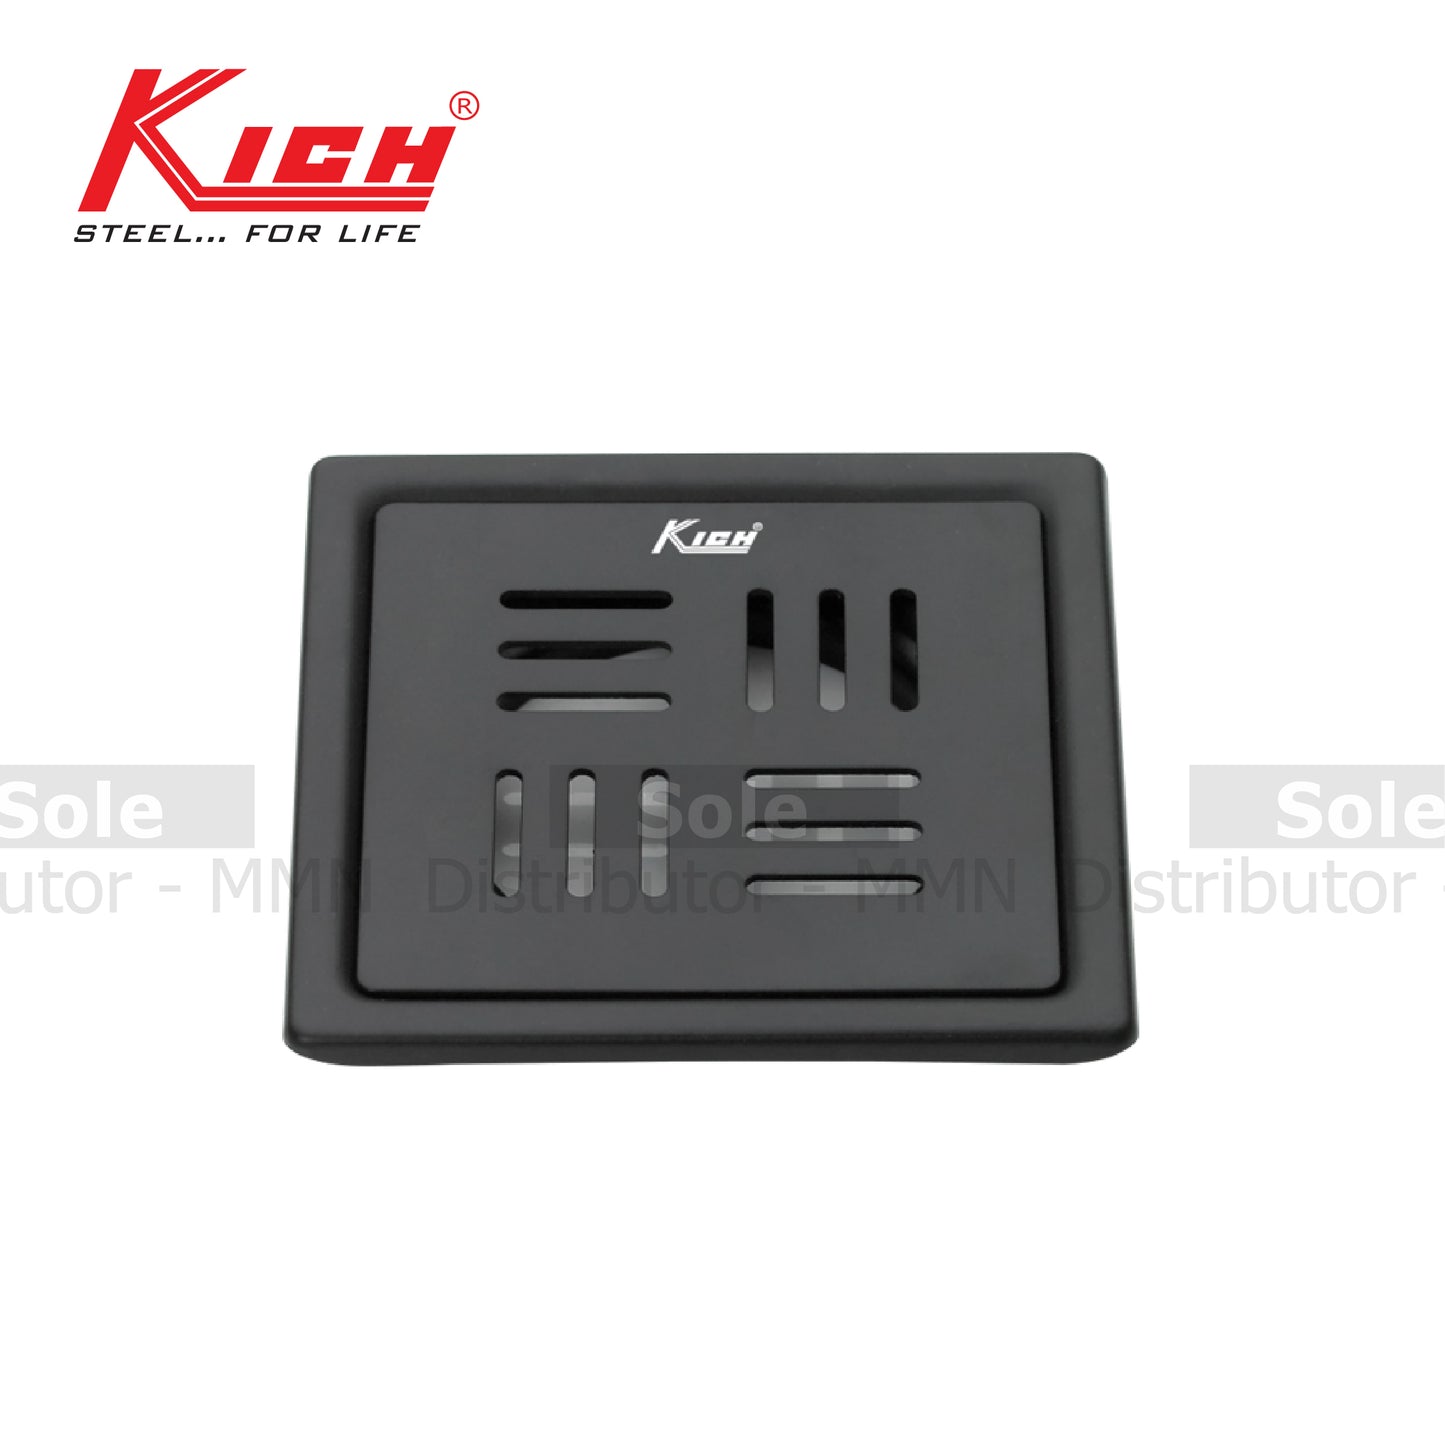 Kich Floor Drain Square, Size 6x6 Inches, Corrosion Resistance AISI 304 Grade Stainless Steel, Black Finish- FD216BS